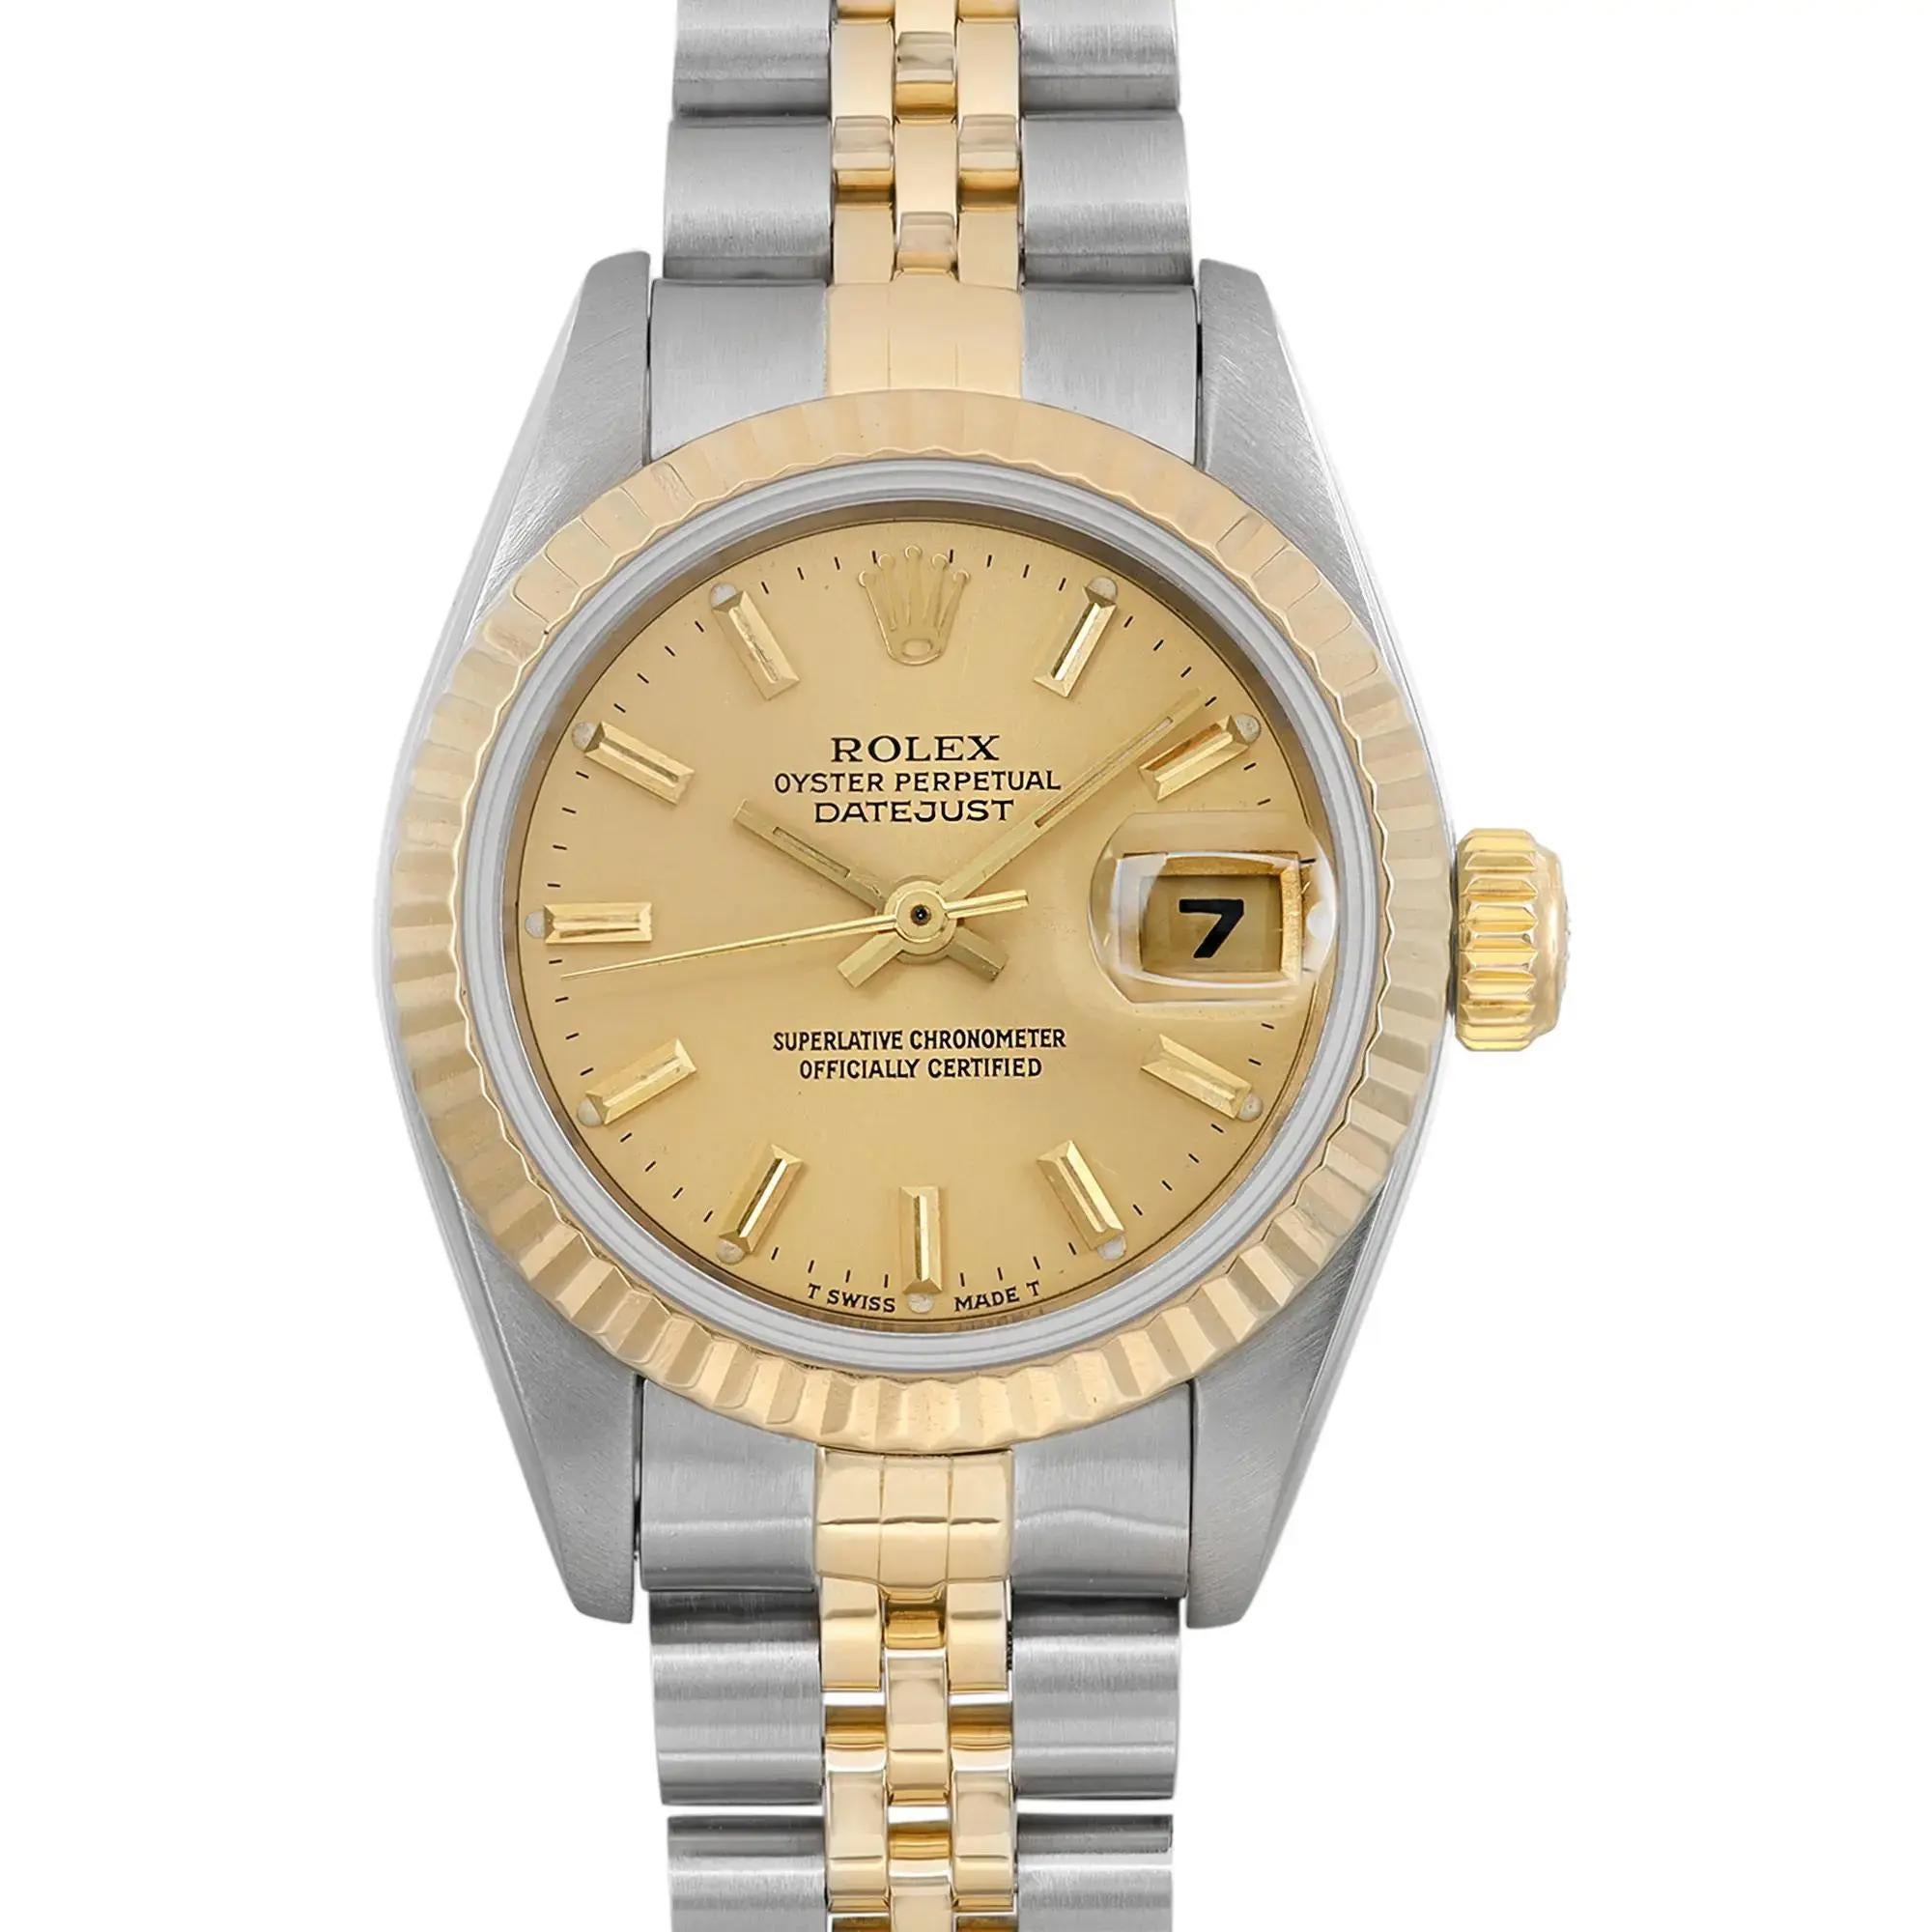 Pre-owned. Good condition. This watch was produced in 1994. The watch shows minor signs of wear. No original box and paper.

Brand & Model Details:
Brand: Rolex
Model: Datejust 69173
Model Number: 69173
Type: Wristwatch
Department: Women
Style: